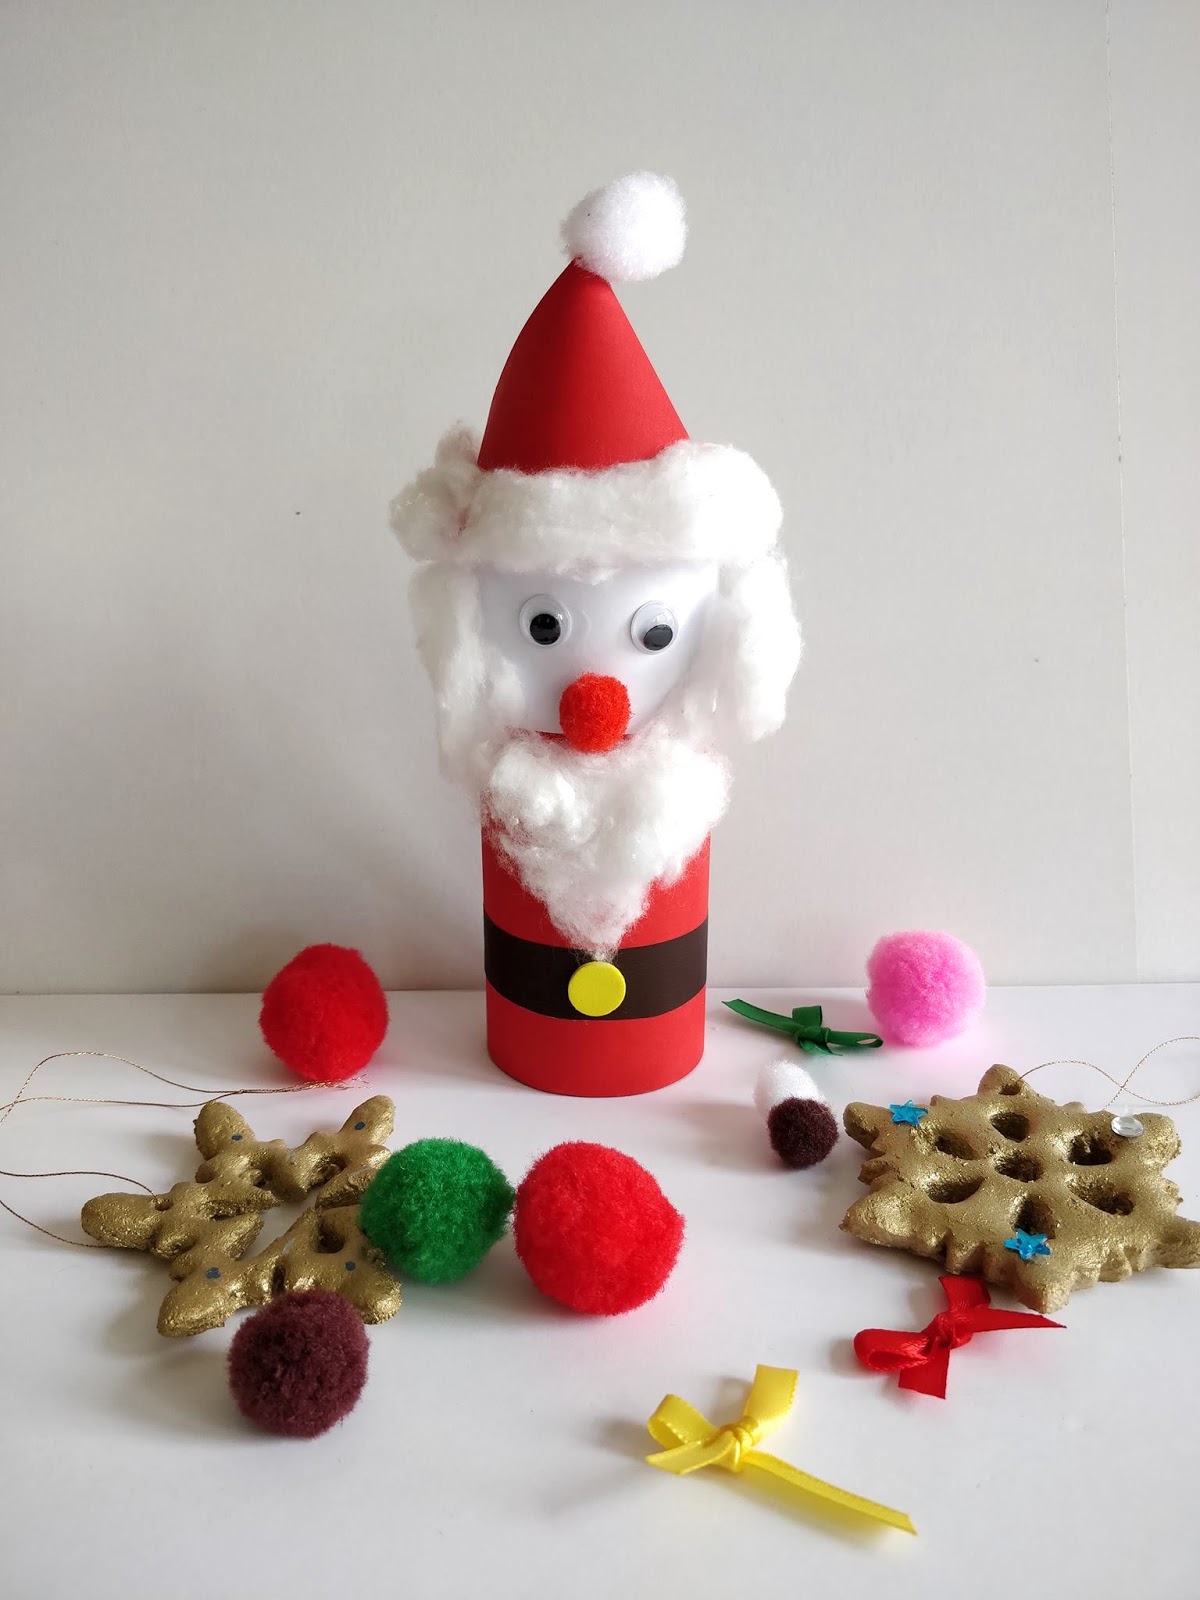 5 easy Christmas crafts to make with kids | Polly and Pip